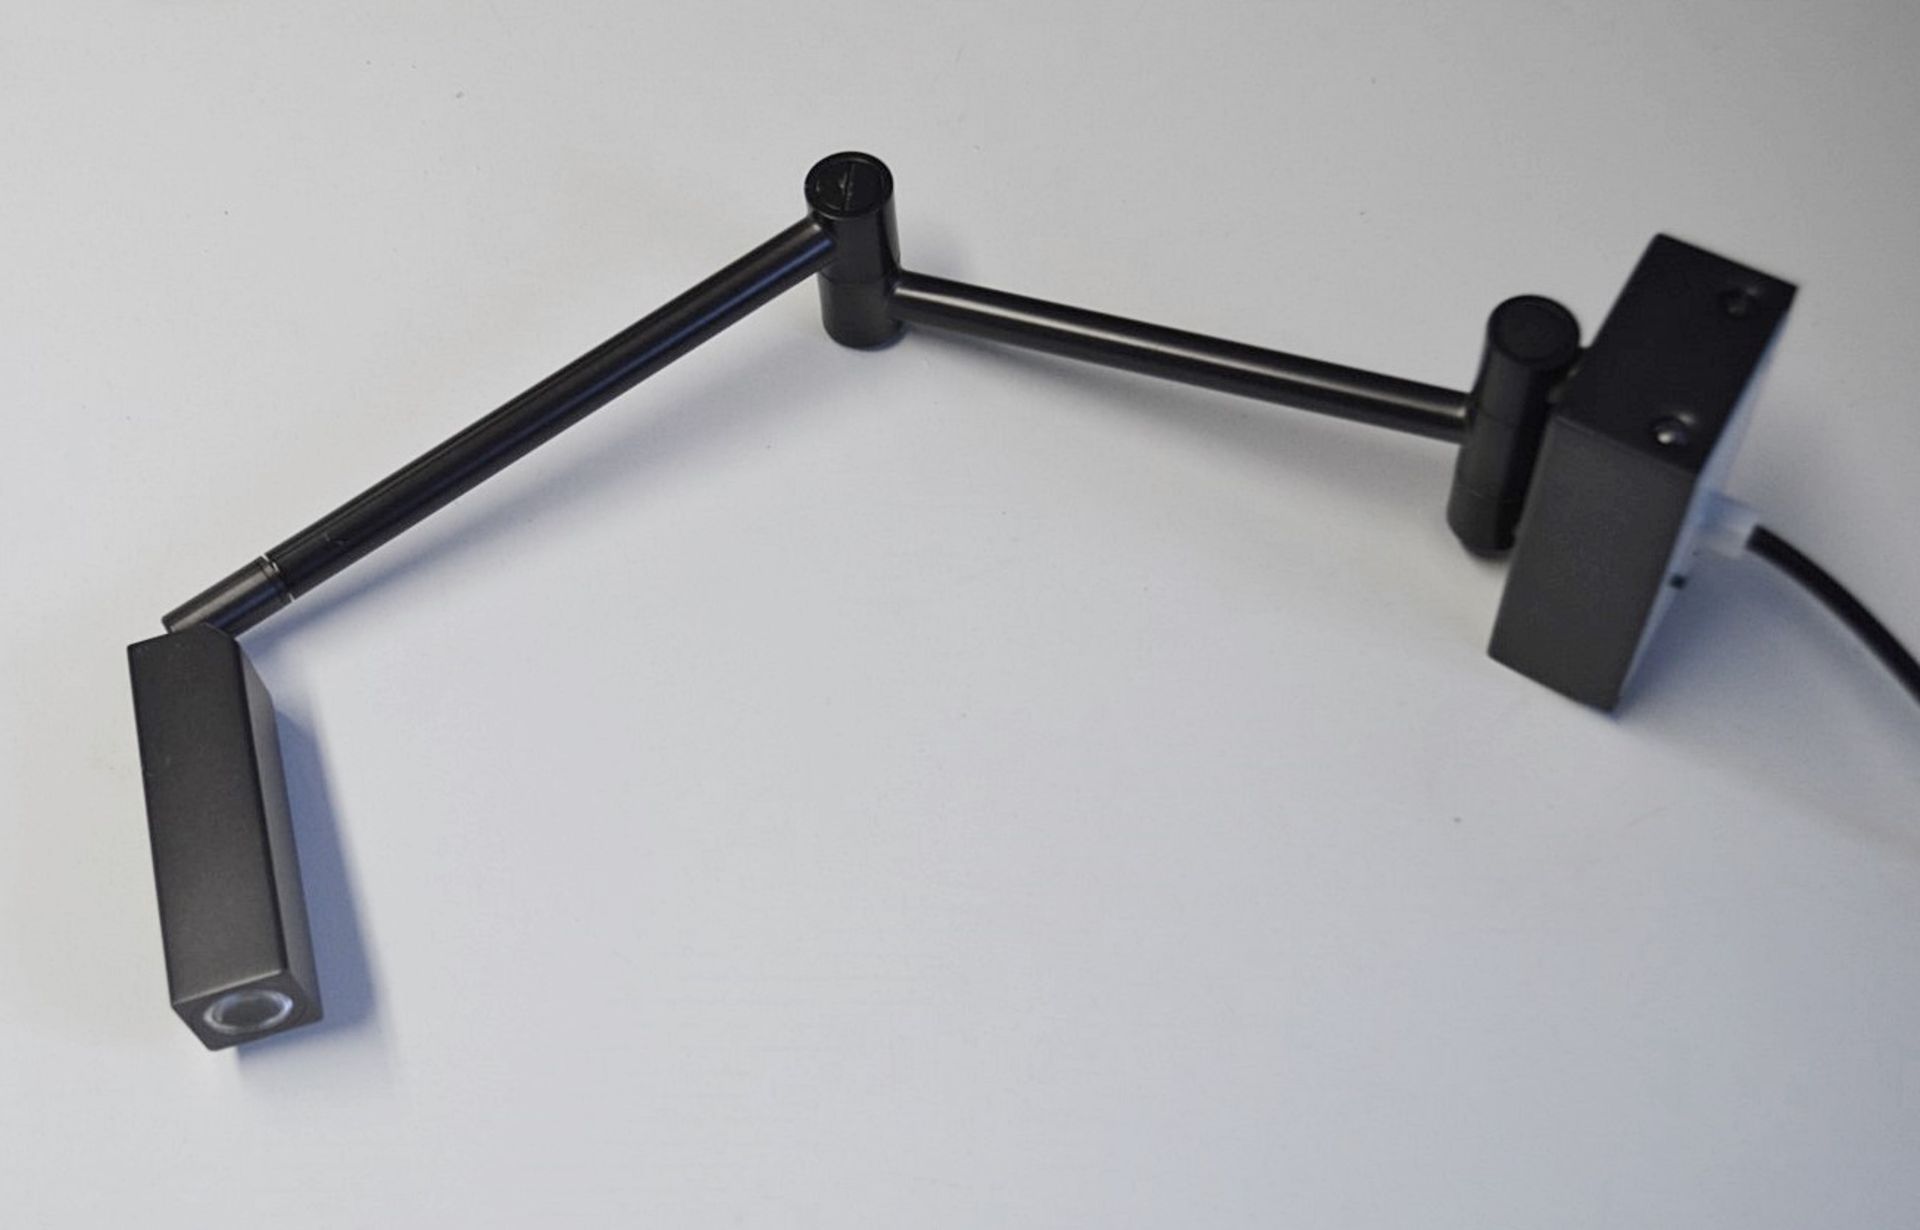 1 x CHELSOM Wall Light In A Black Bronze Finish - Unused Boxed Stock - Dimensions: Width 10cm / Max.